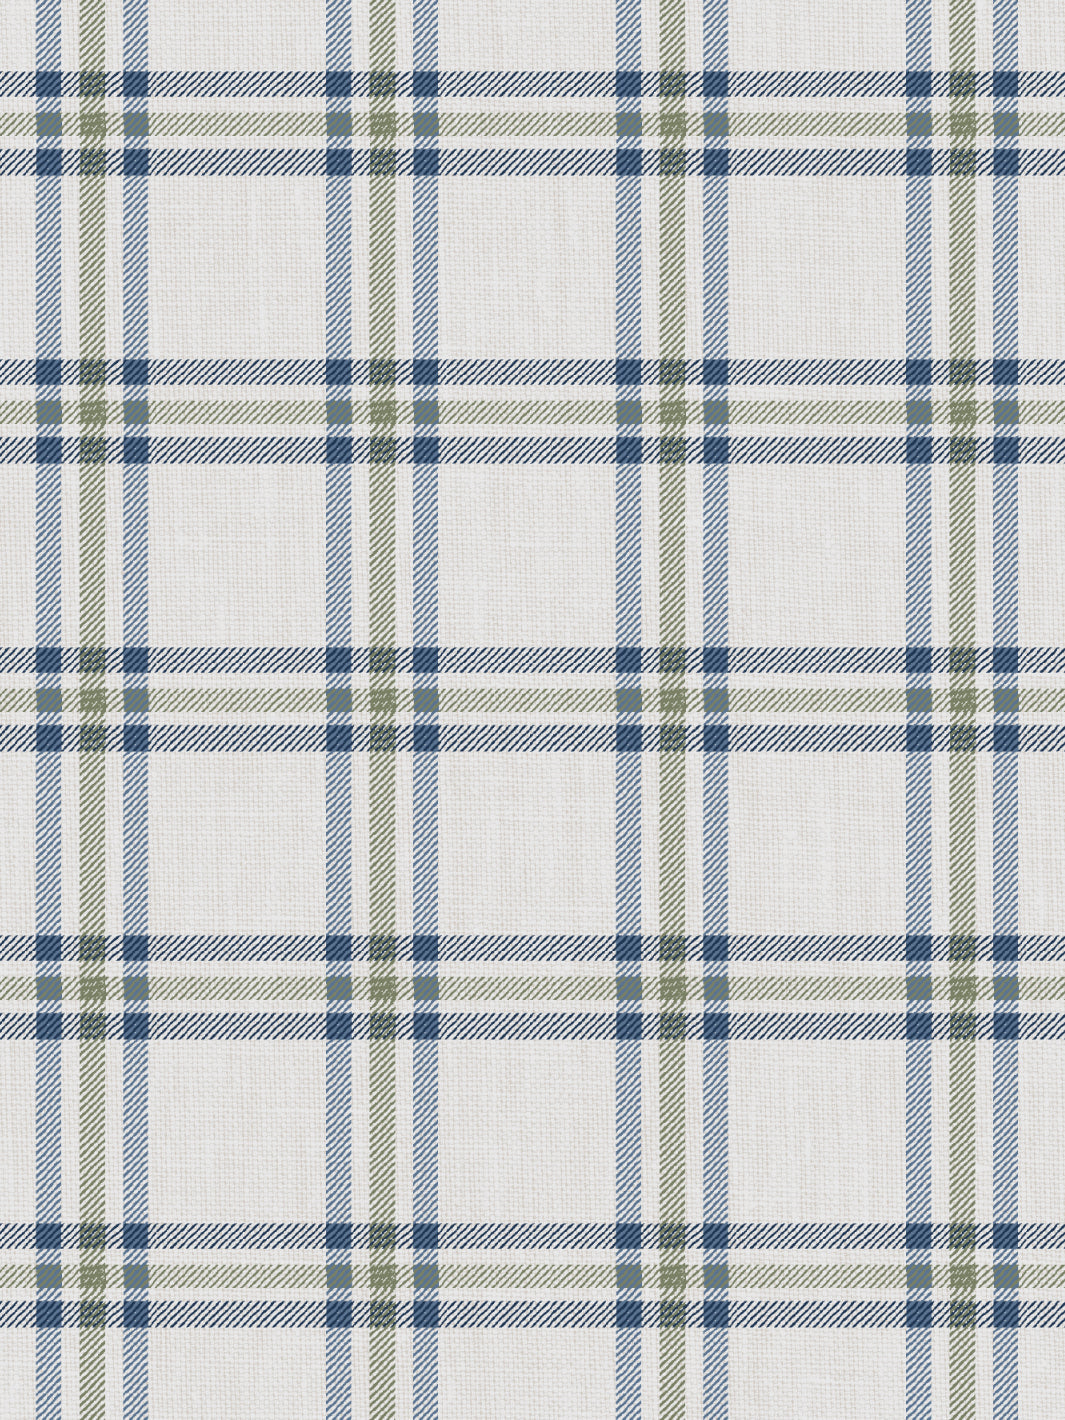 'Rogers Plaid' Wallpaper by Nathan Turner - Blue Green